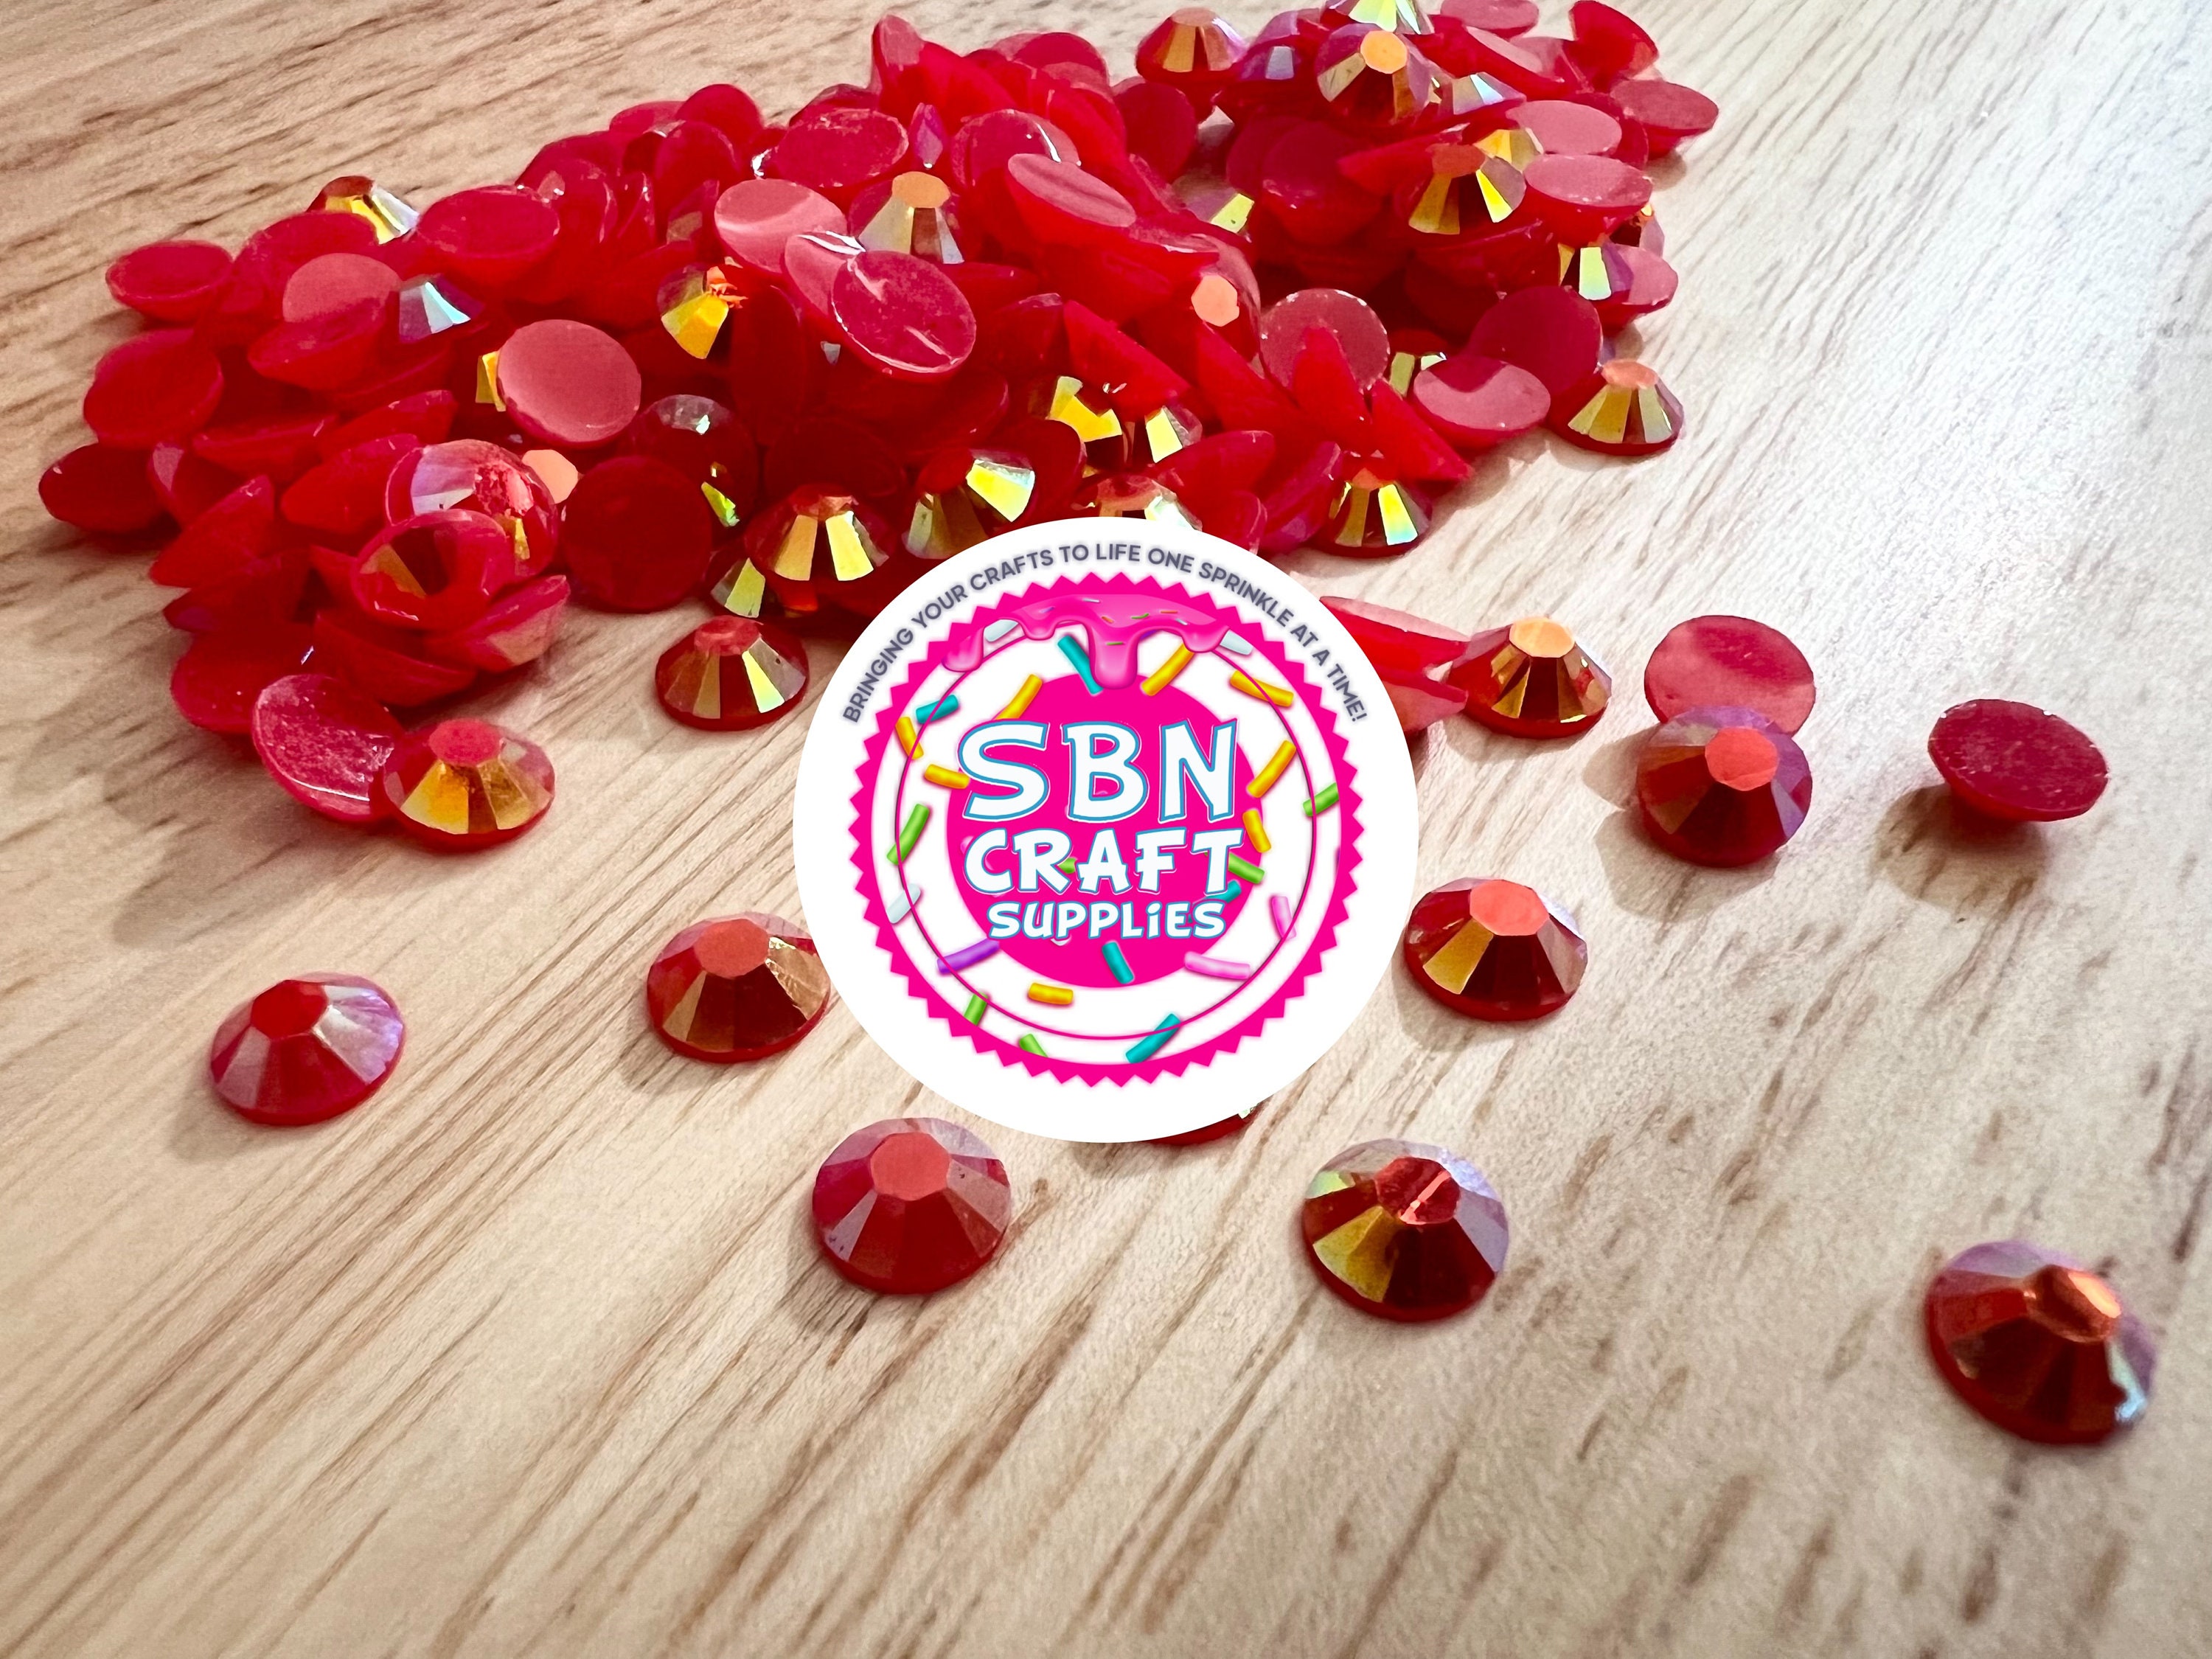 Cranberry Red Opaque Jelly Flatback Resin Rhinestones NO AB Coating Choose  Size 2mm 3mm 4mm 5mm 6mm Nonhotfix SBN Craft Supplies 